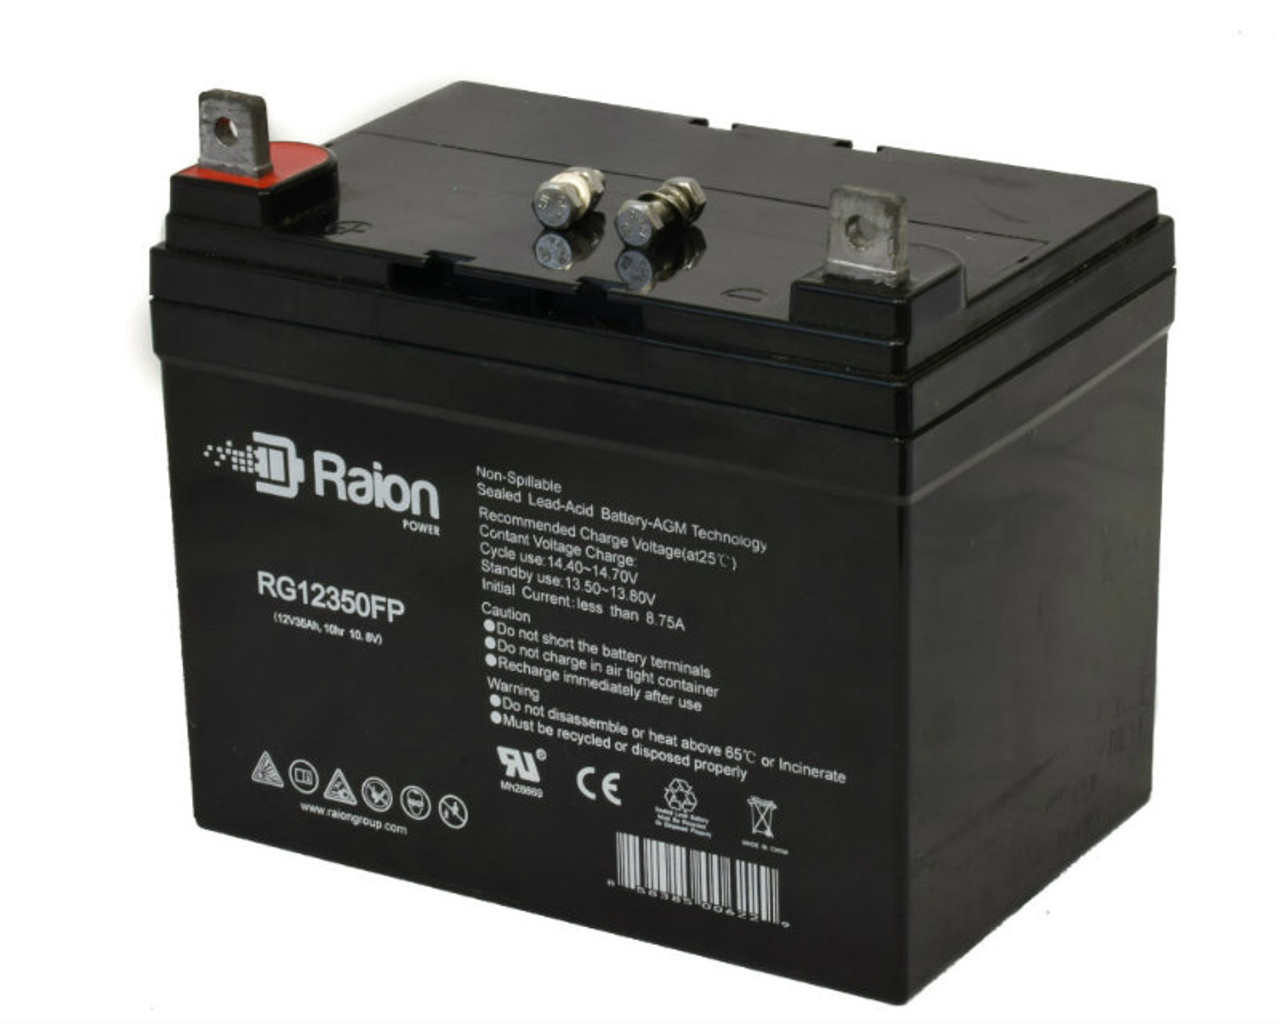 Raion Power Replacement 12V 35Ah RG12350FP Battery for Allis-Chalmers 1817